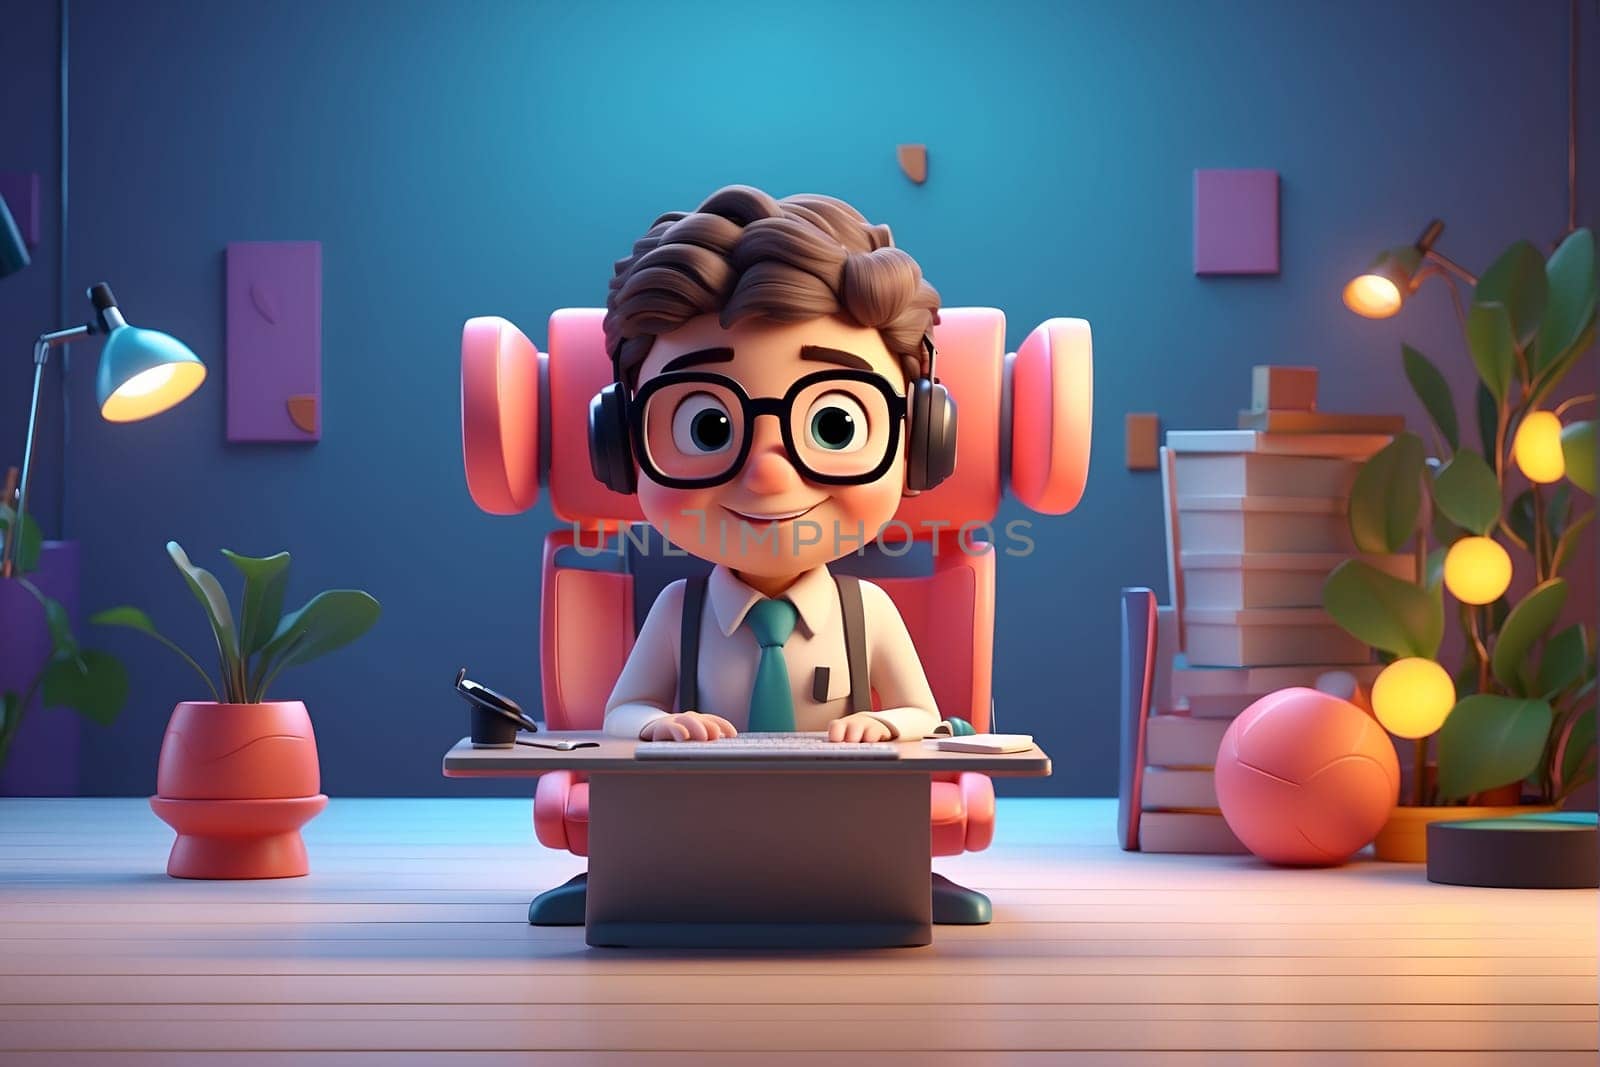 A cartoon character seated on a chair, working on a laptop with a focused expression.